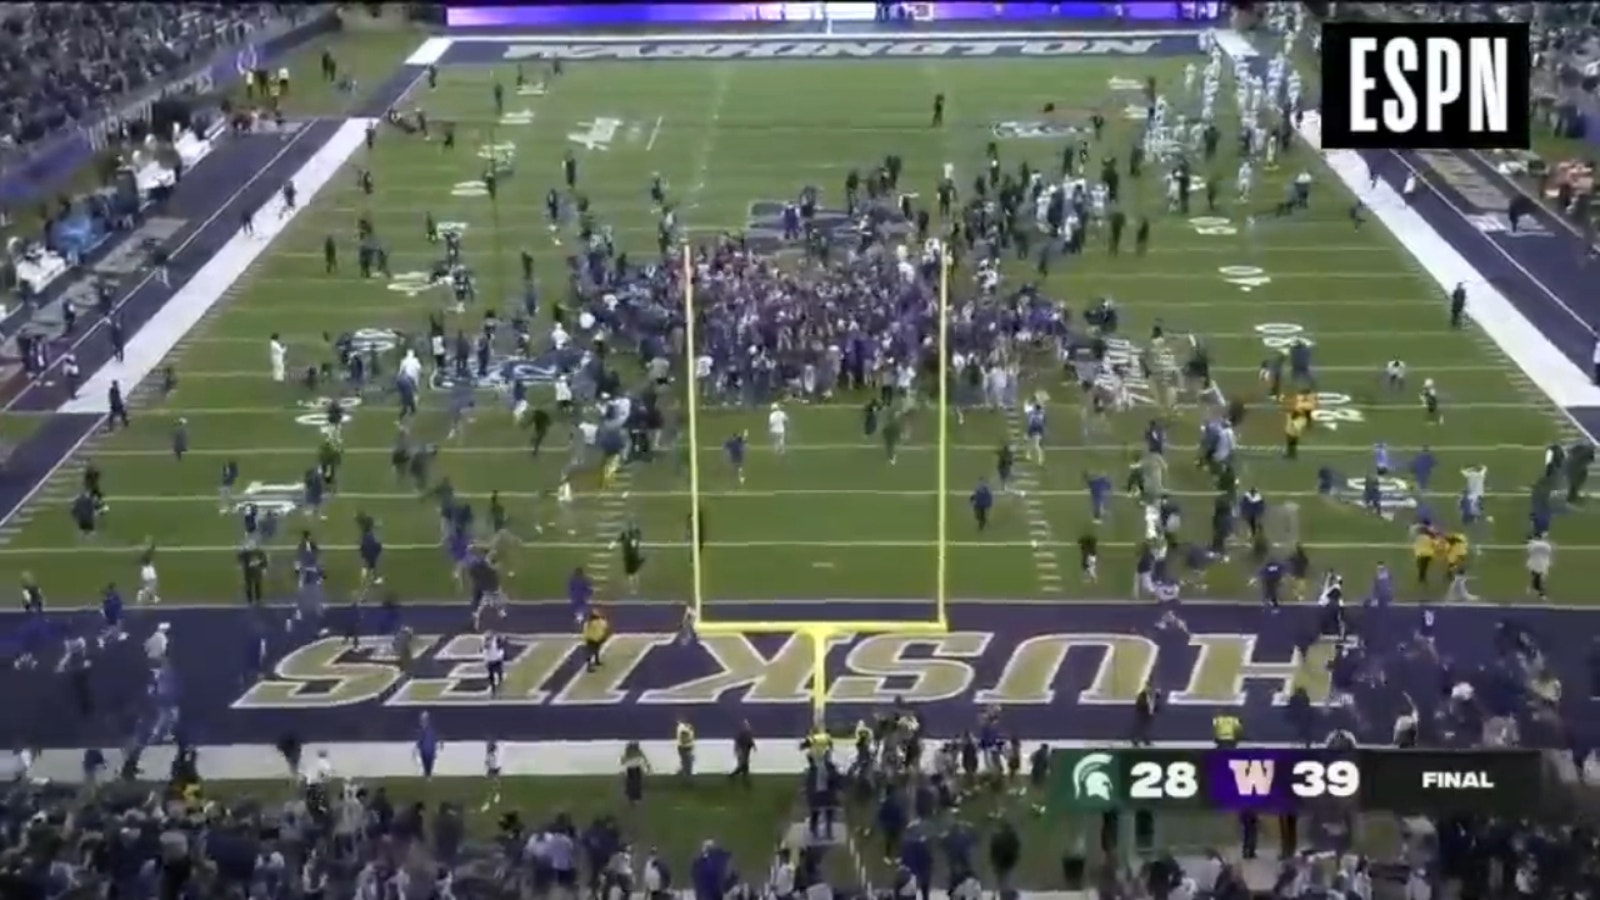 Washington fans storm the field after upsetting number 11 Michigan State